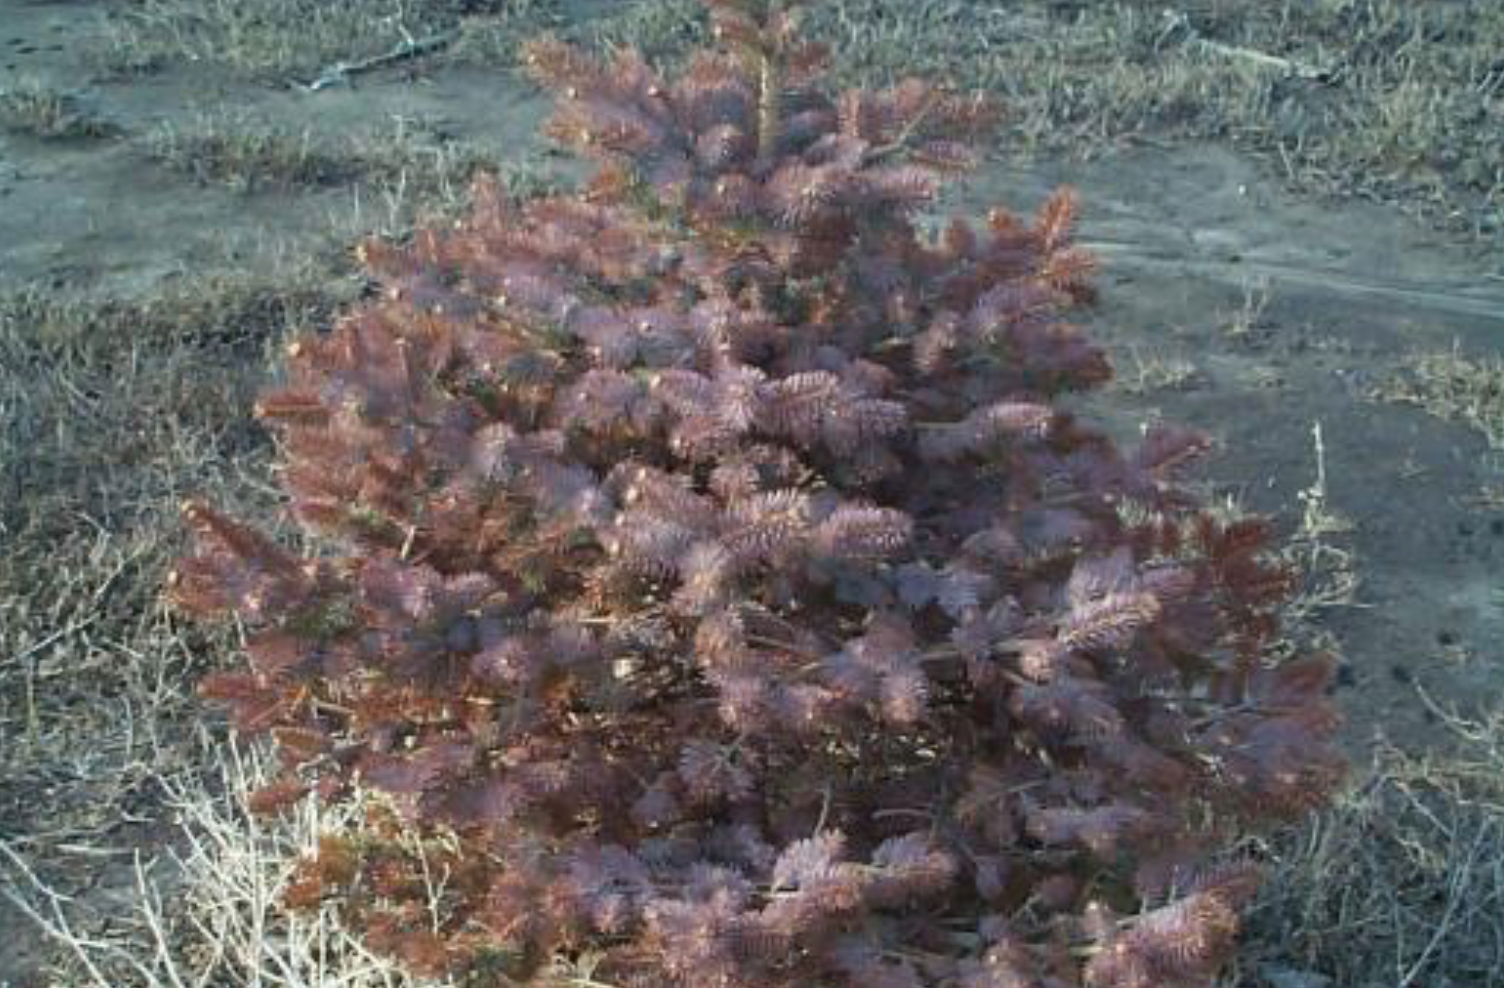 spruce tree seedling with weeds beneath it